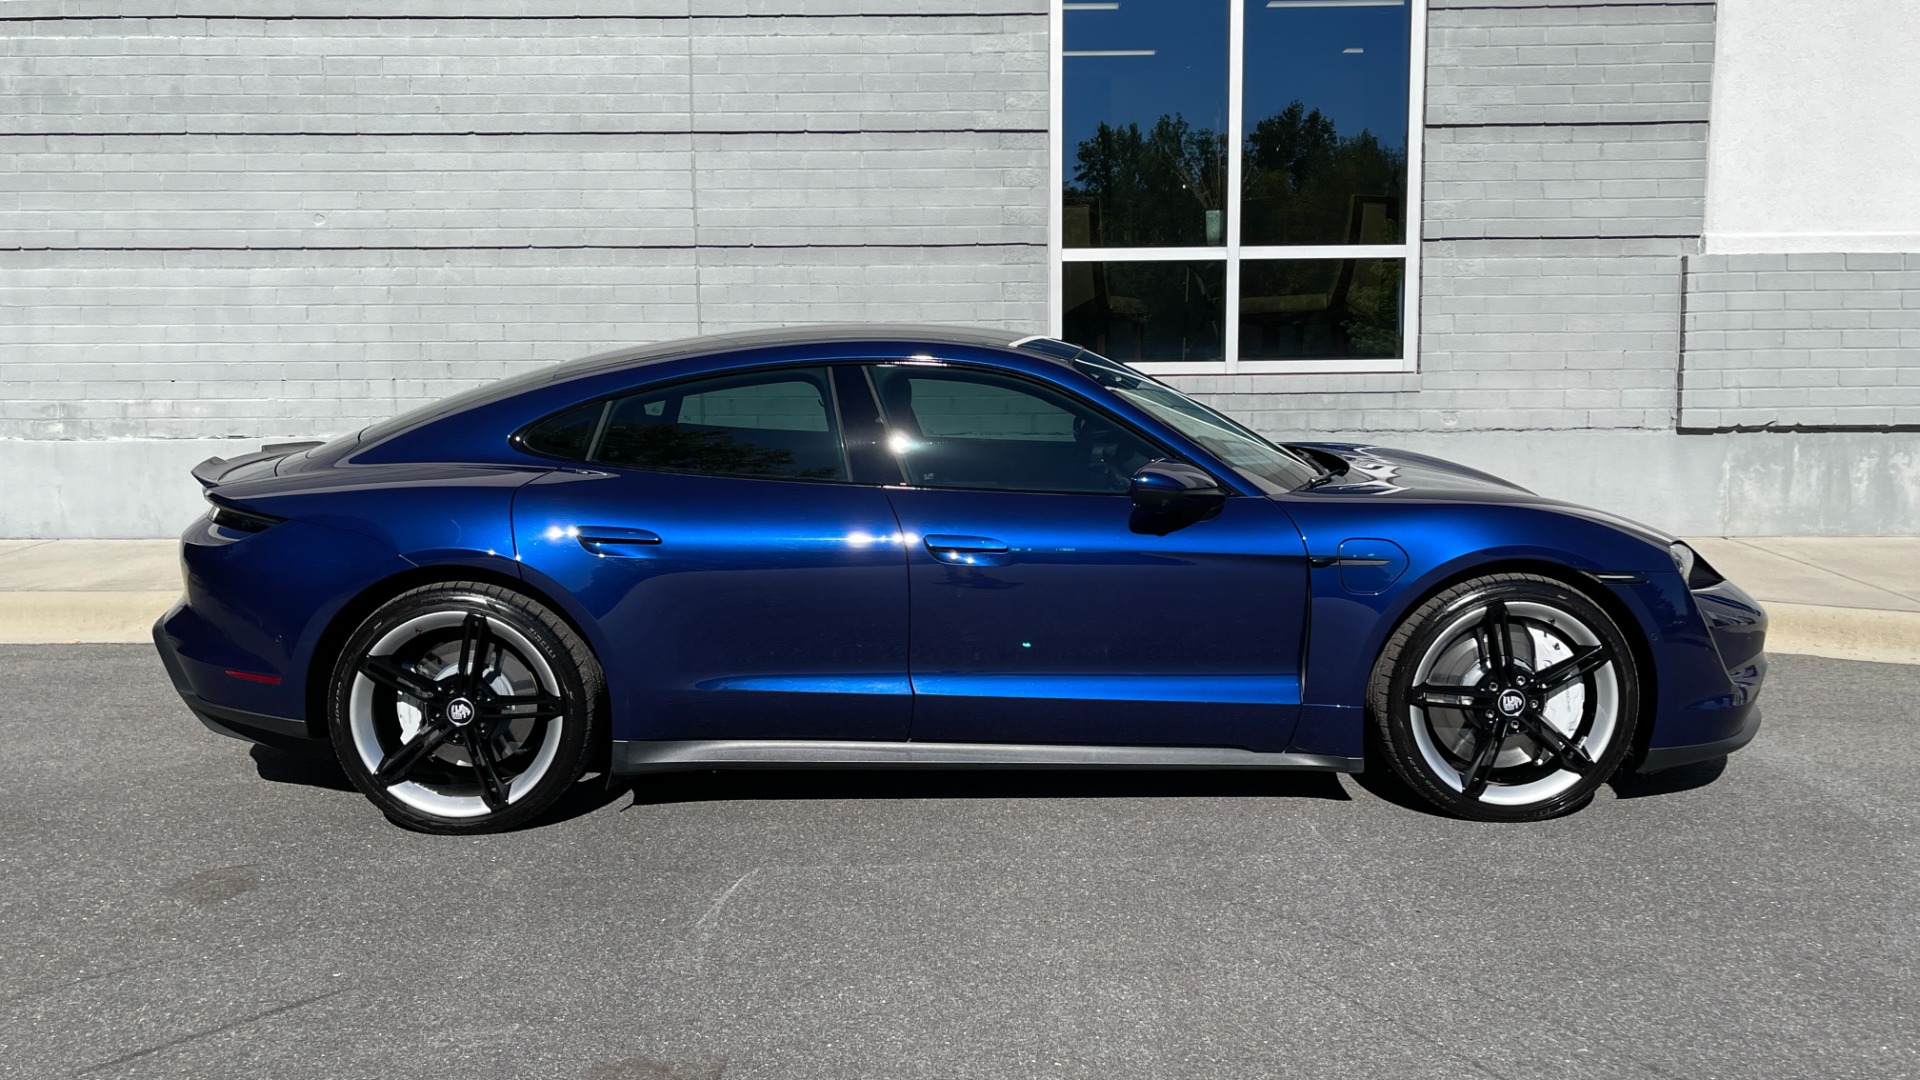 Used 2020 Porsche Taycan 4S / PERFORMANCE BATTERY / PAINT PROTECTION / SPORT CHRONO / PREMIUM PACKAG for sale $124,995 at Formula Imports in Charlotte NC 28227 3